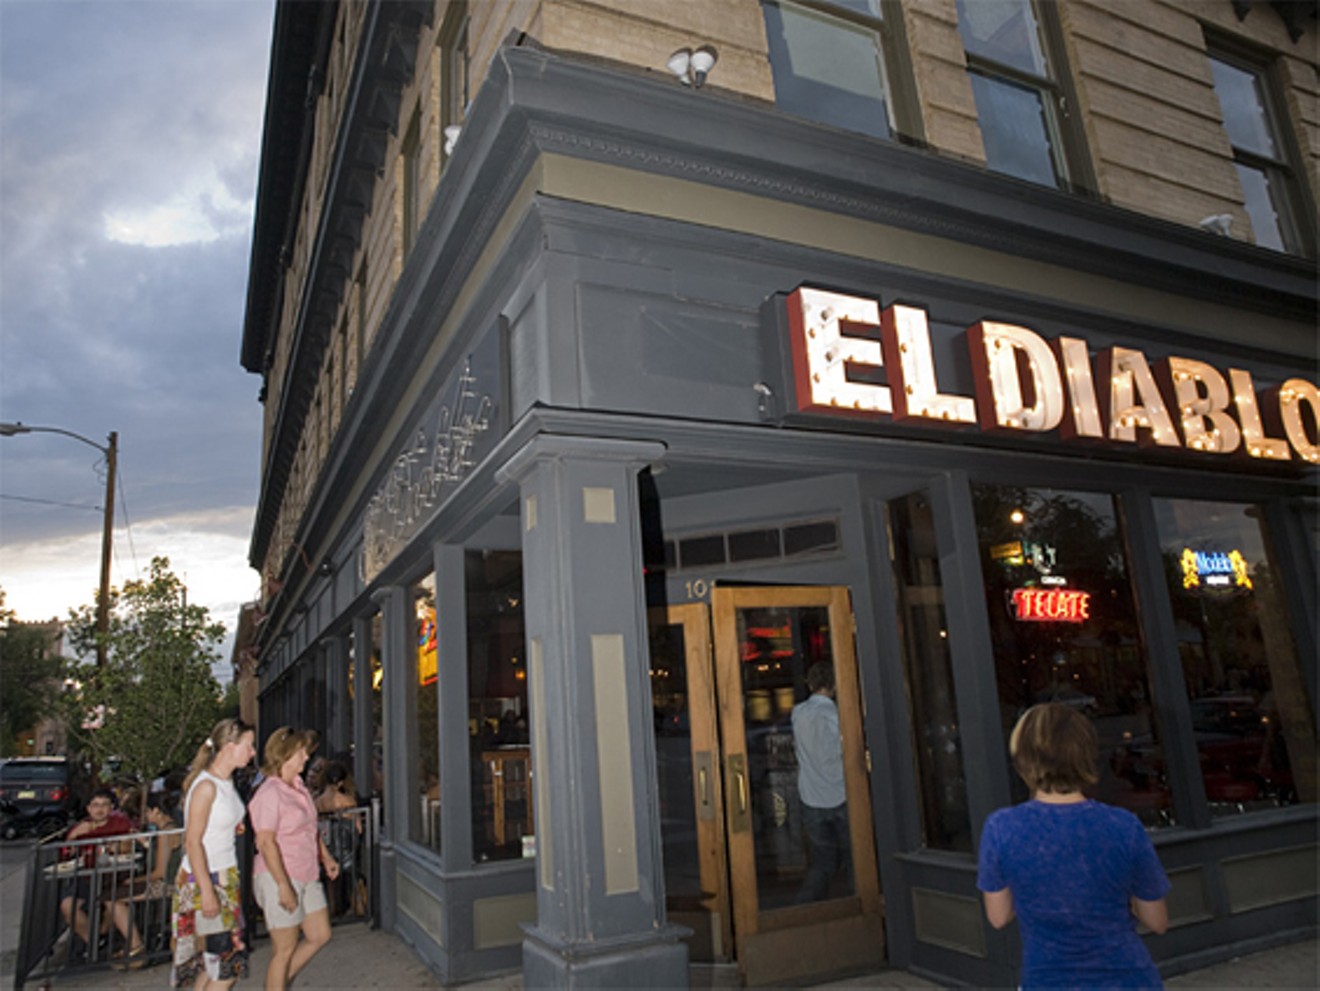 This is what the First Avenue Hotel looked like when El Diablo held court from 2010 to 2013.